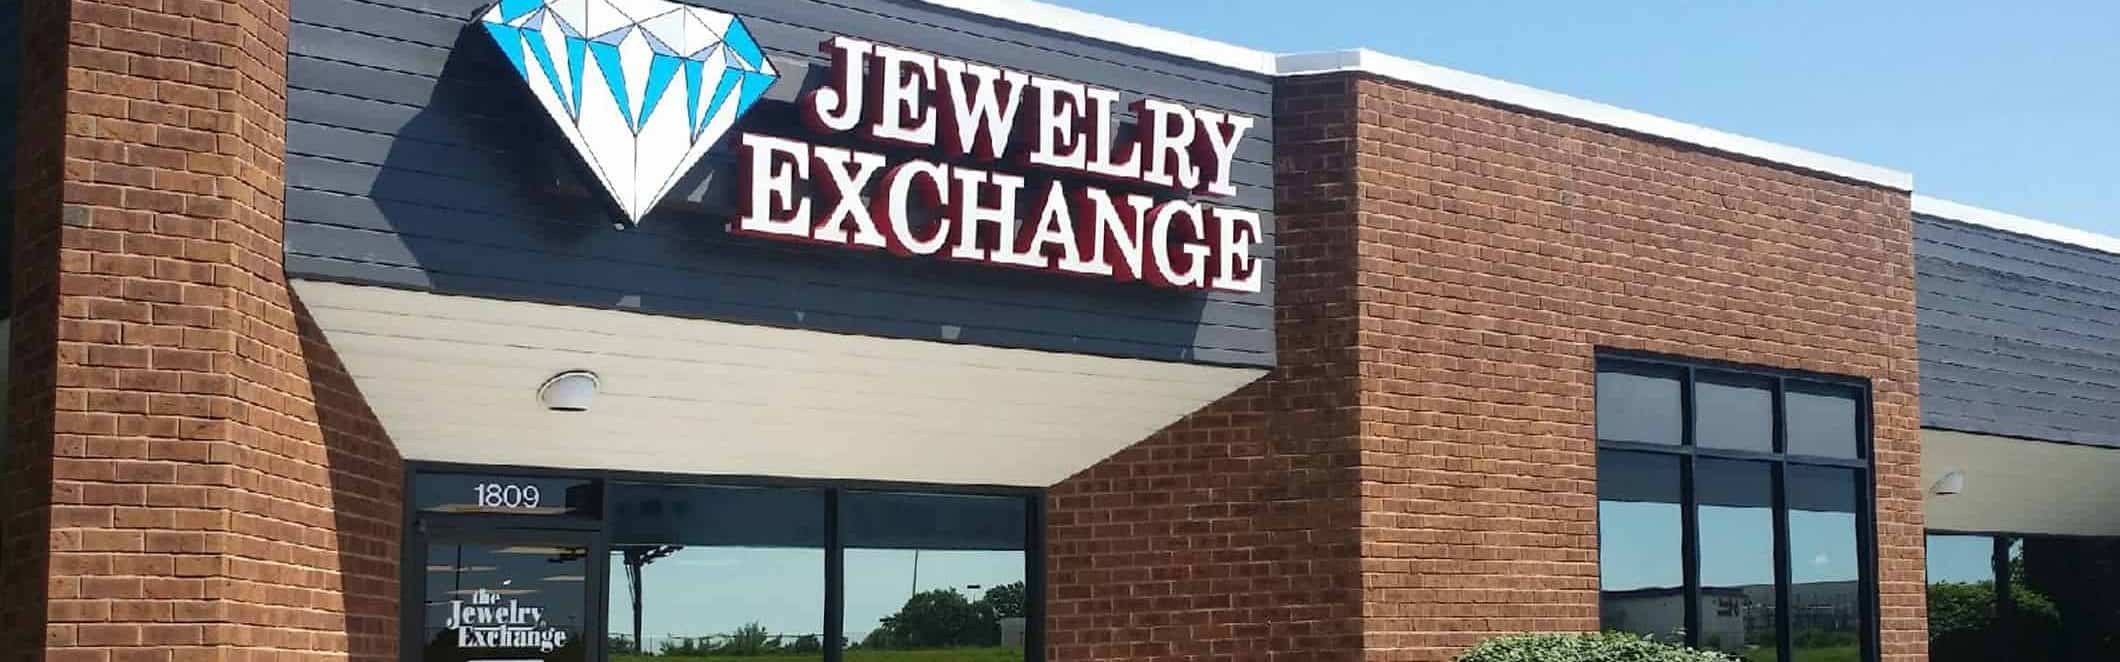 The St Louis Jewelry Exchange